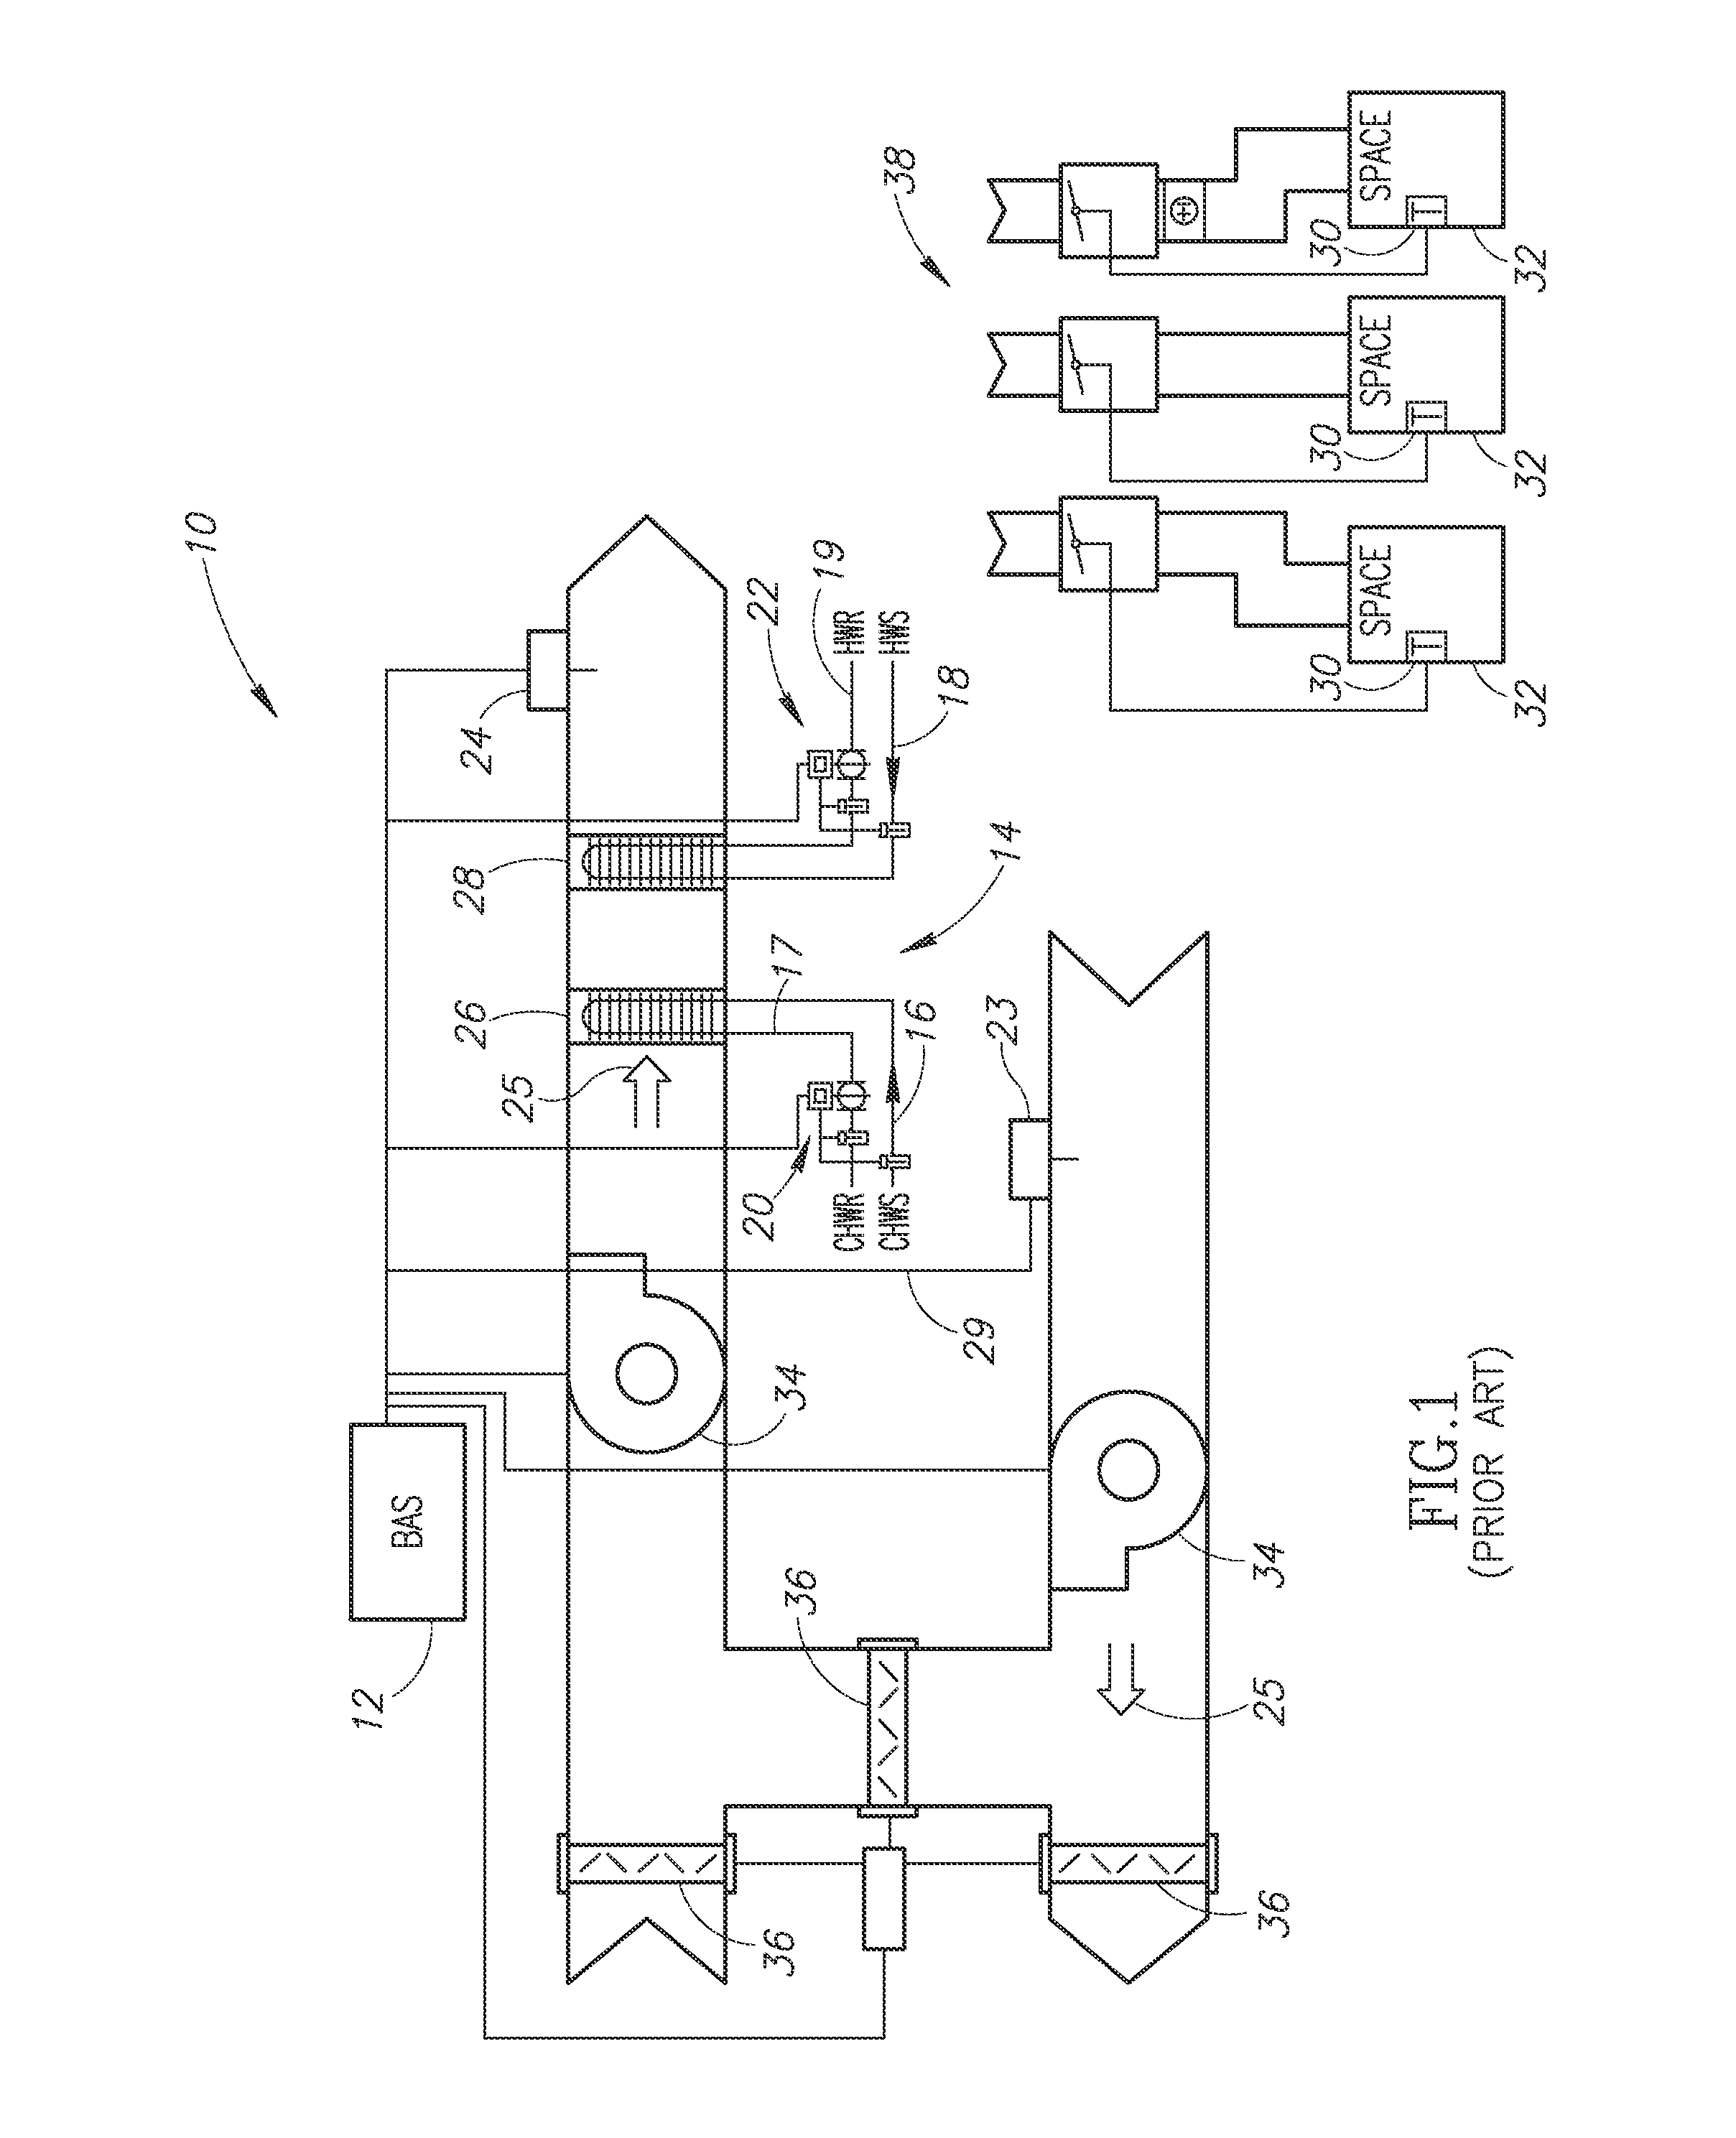 Systems and methods for fault detection using smart valves